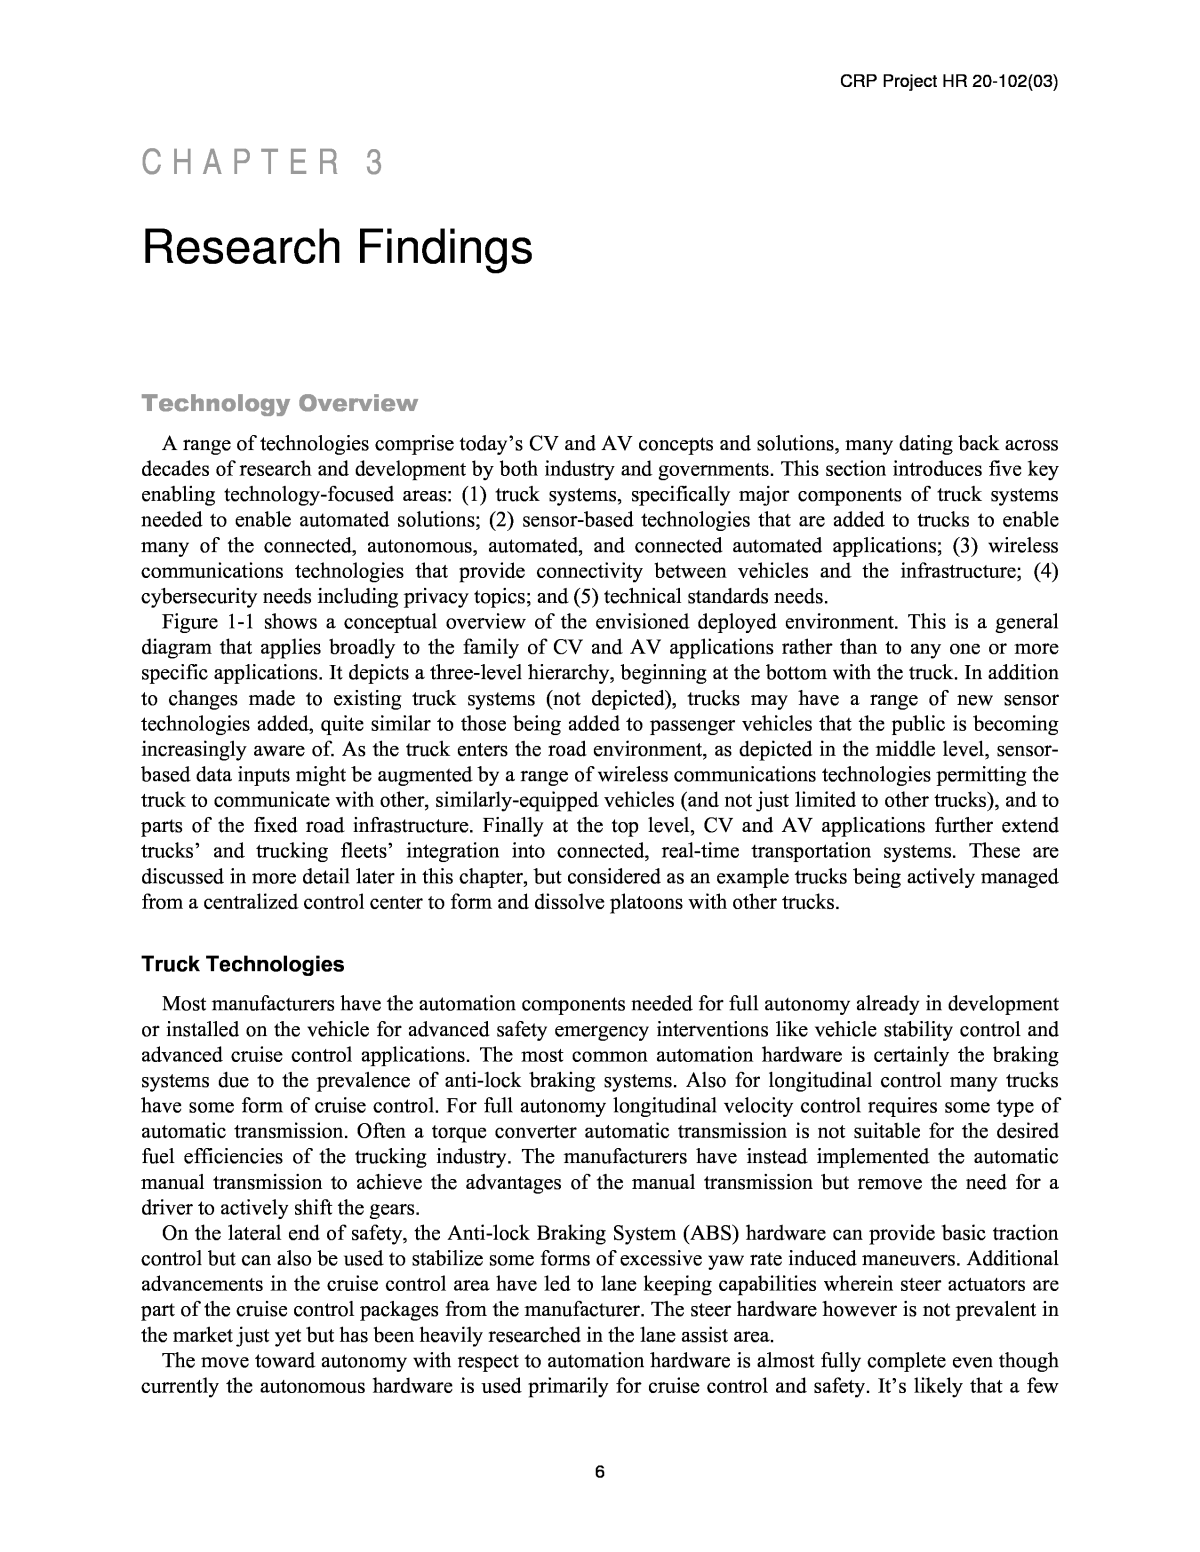 What are research findings?